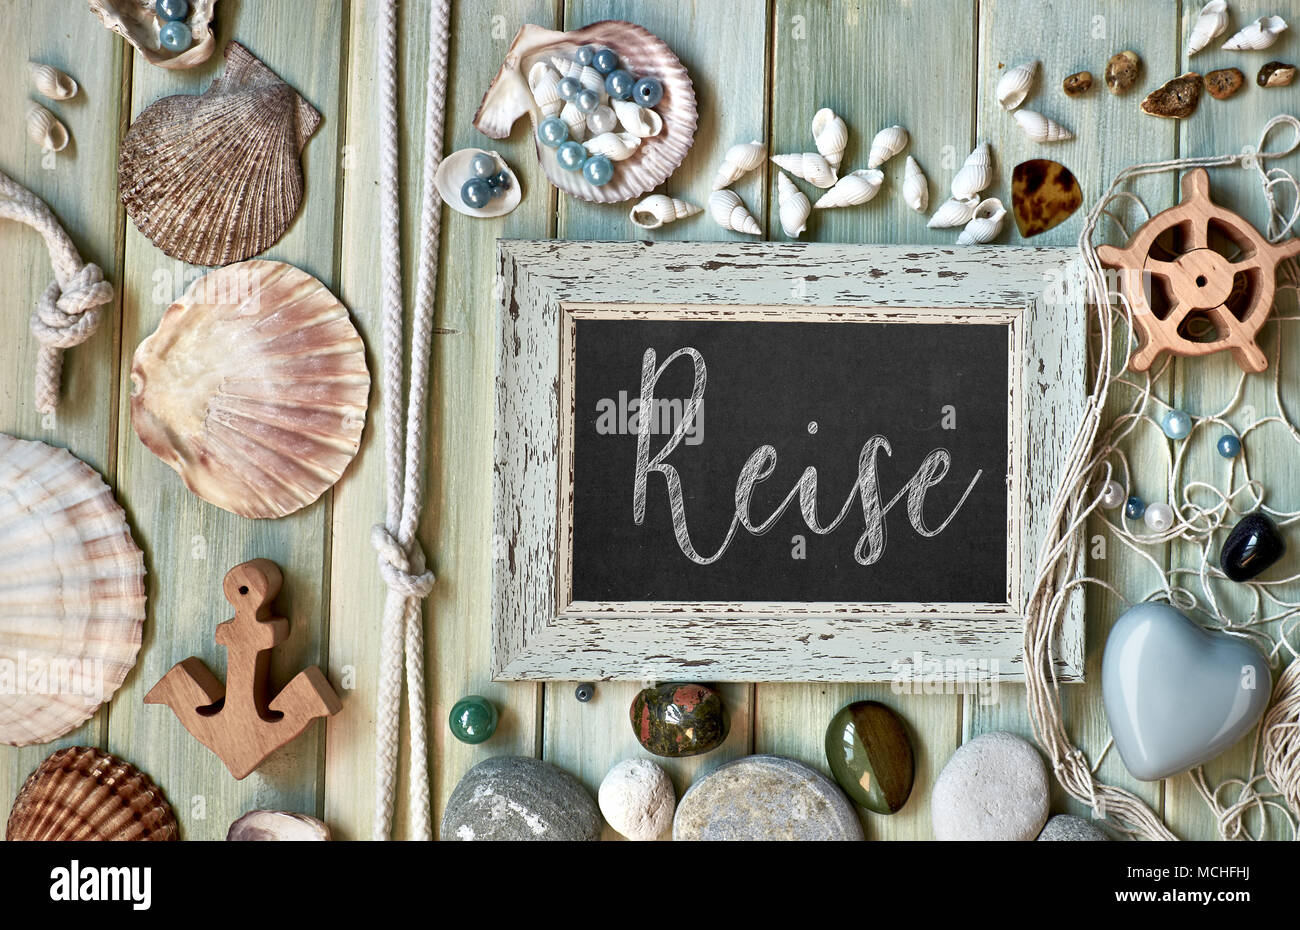 Blackboard With Maritime Decorations on light wood, text in German. 'Reise' means 'Vacations'. Stock Photo